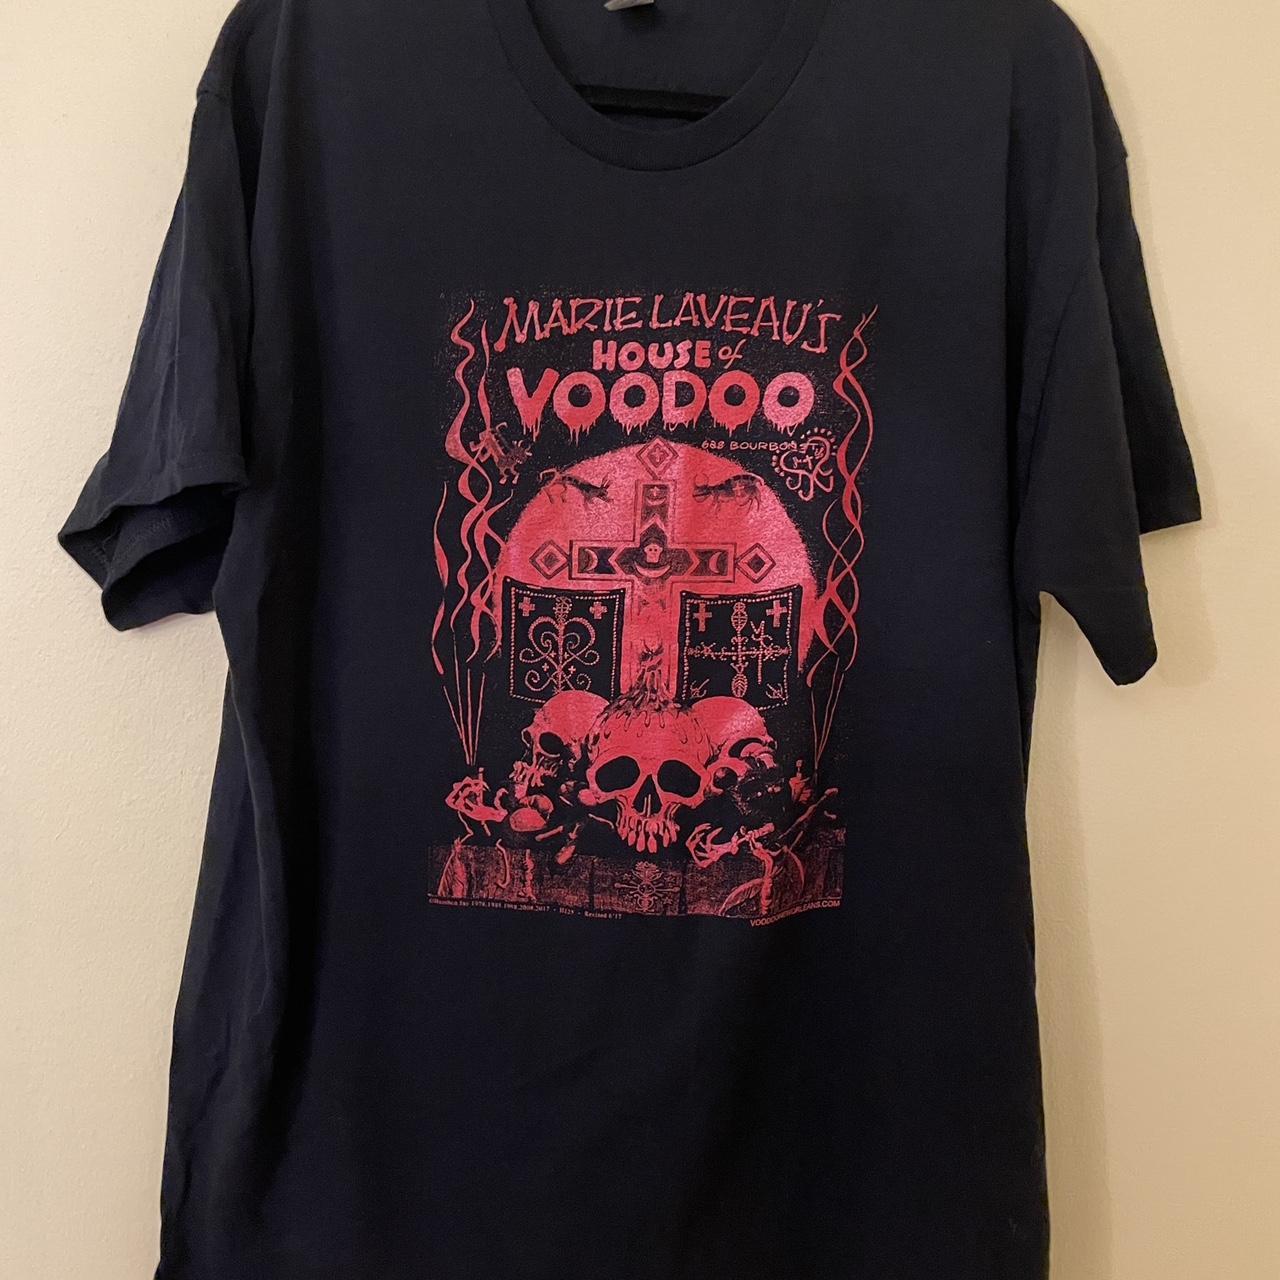 Mary Laveau's House of Voodoo T shirt, size XL. ... - Depop